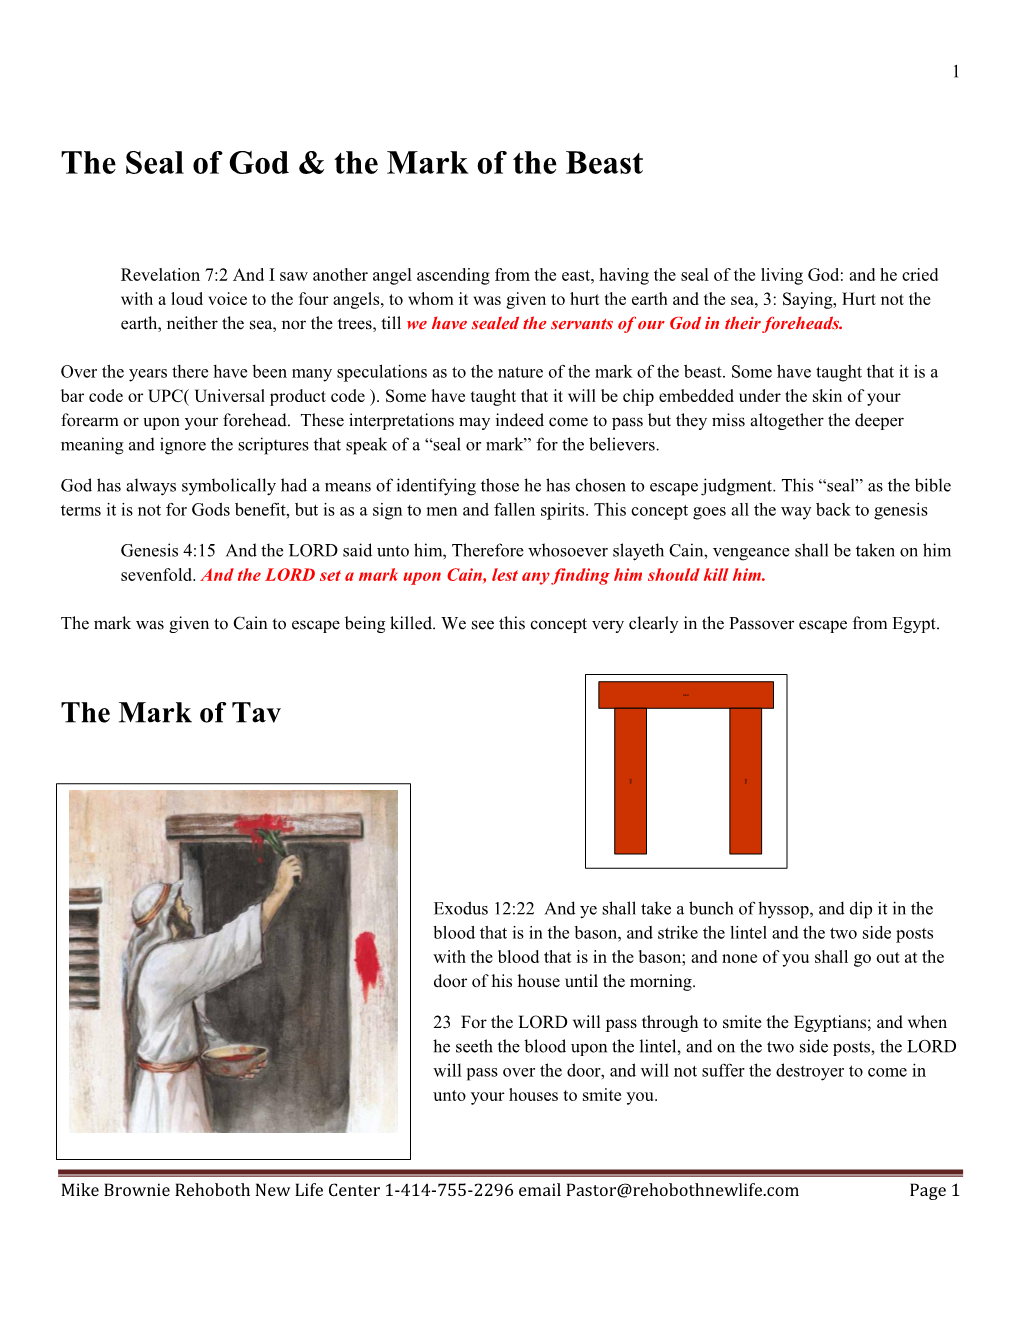 The Seal of God & the Mark of the Beast